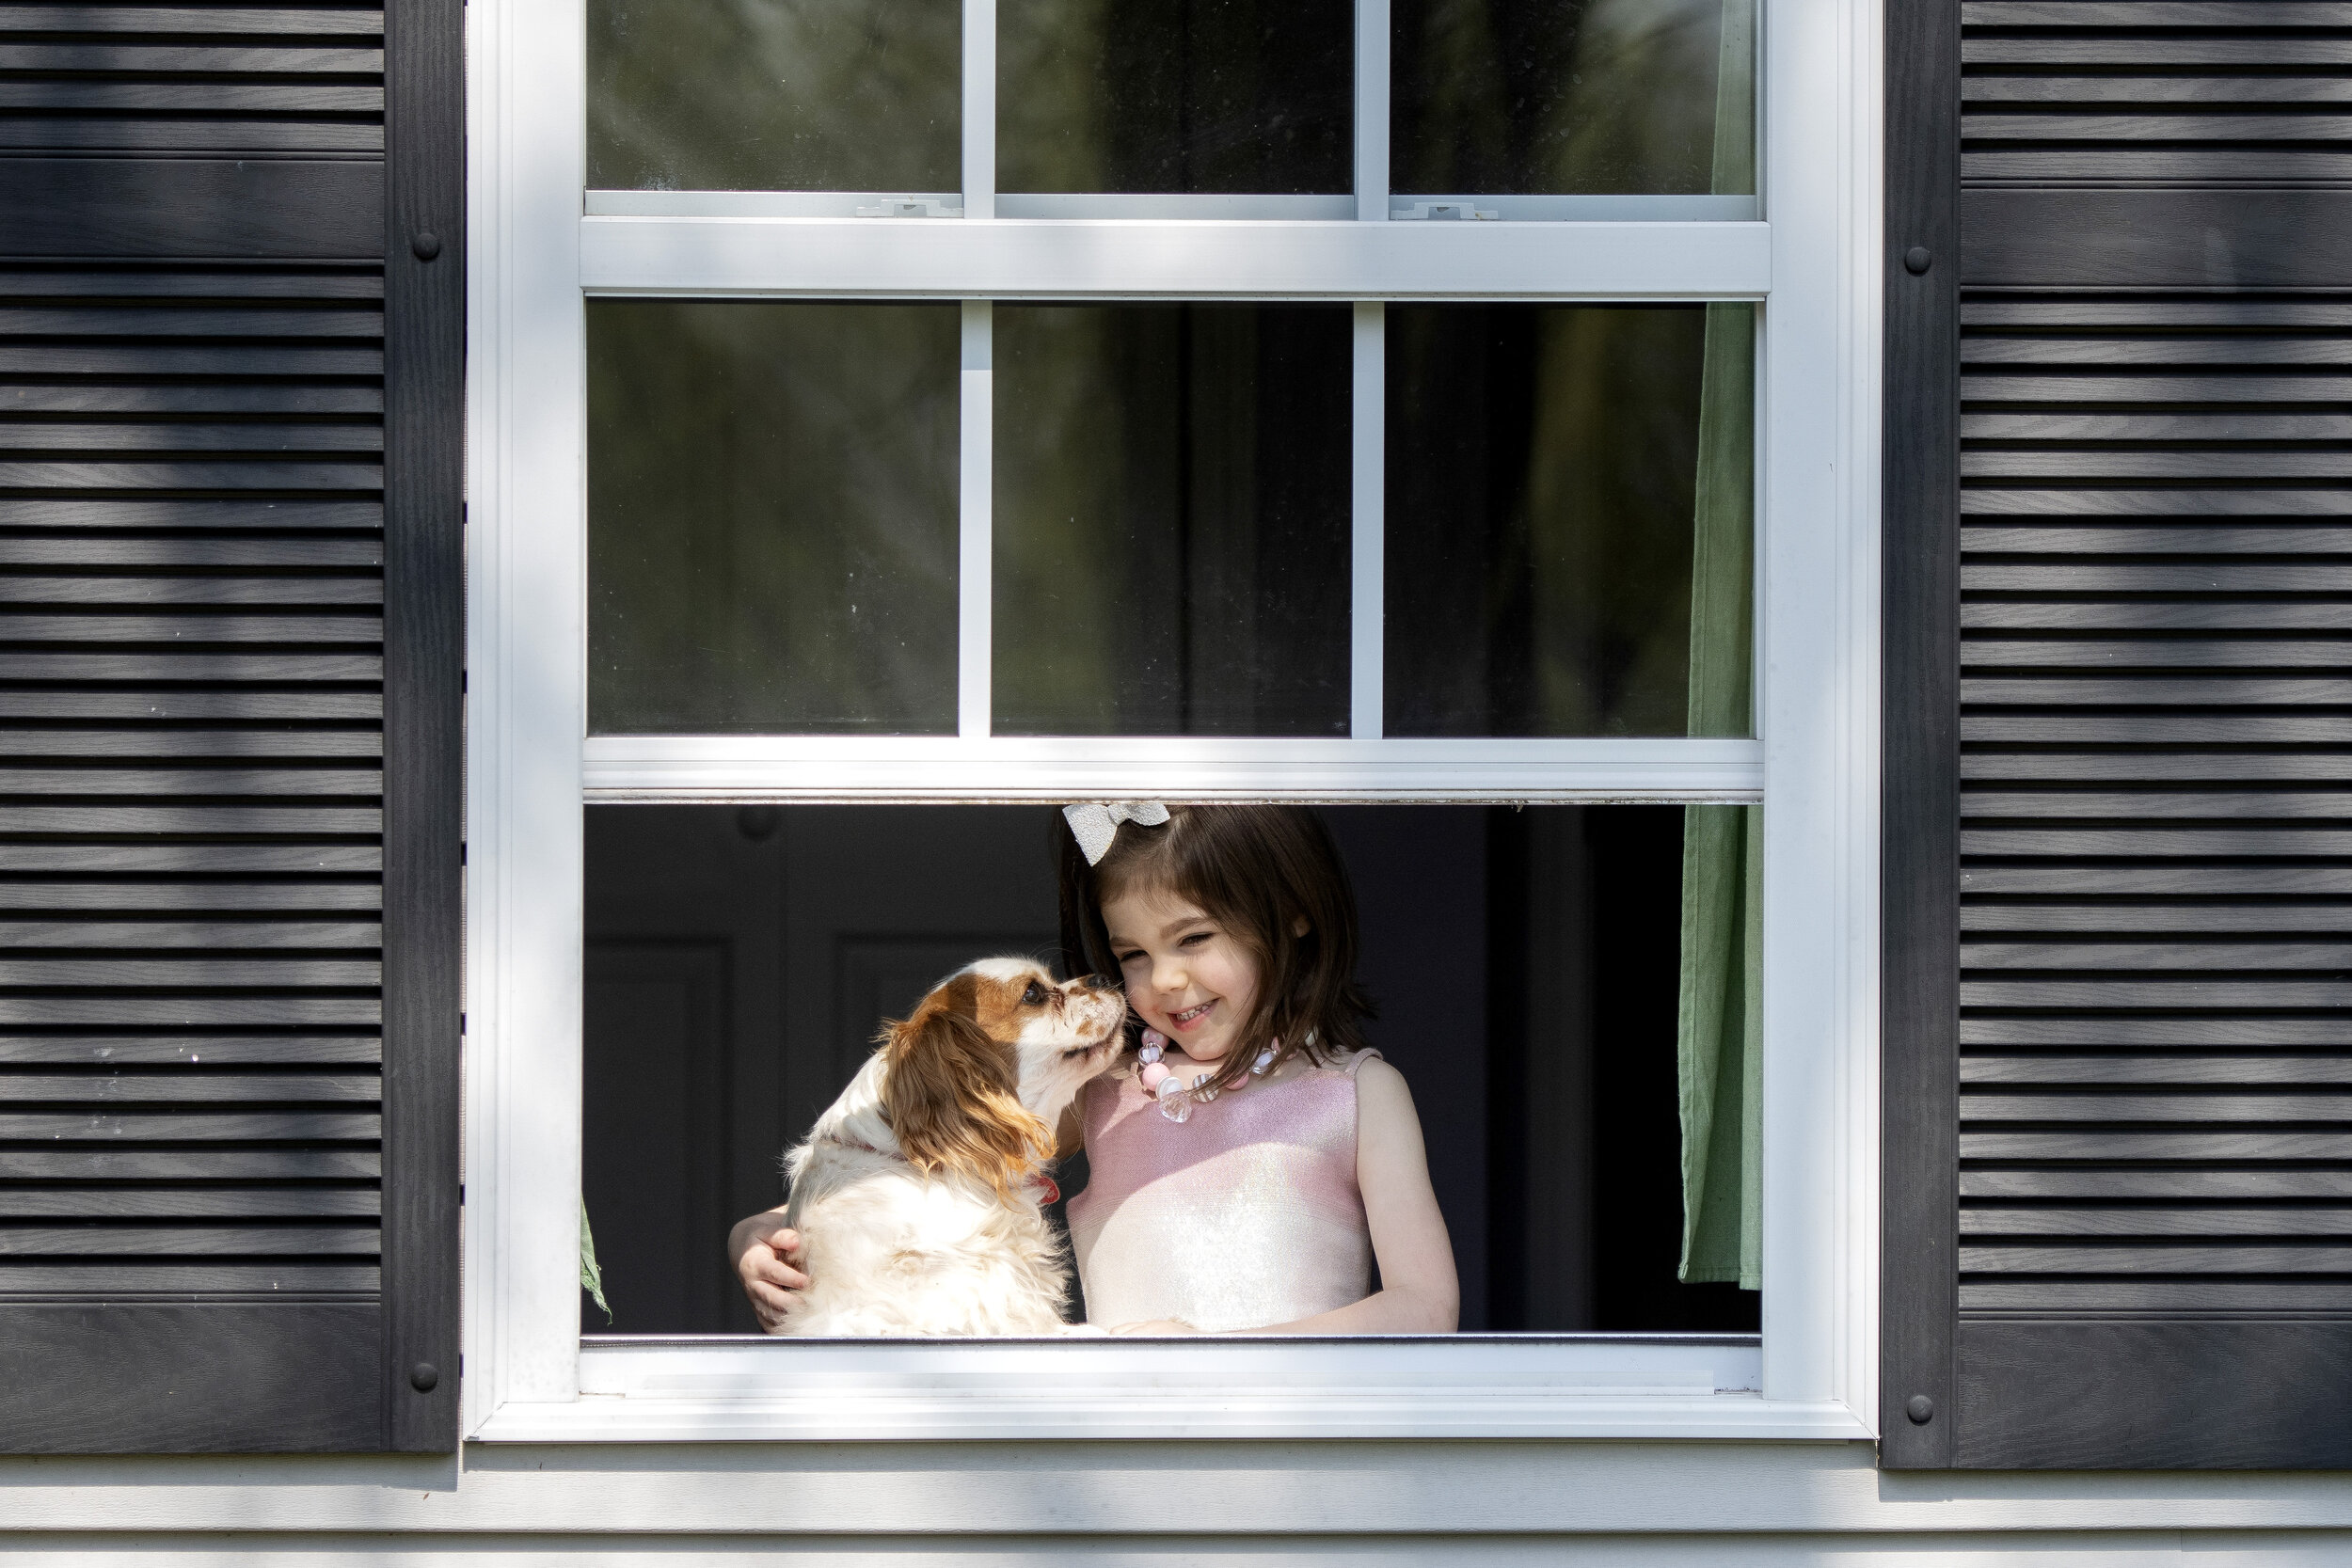  Annistyn “Anni” Bridges, 4, shares a moment with the dog, Nash, while taking a portrait Wednesday, April 8, 2020, at their Cape Girardeau home. Heather Bridges, originally of Benton, Missouri, and now Cape Girardeau, has been working full time while